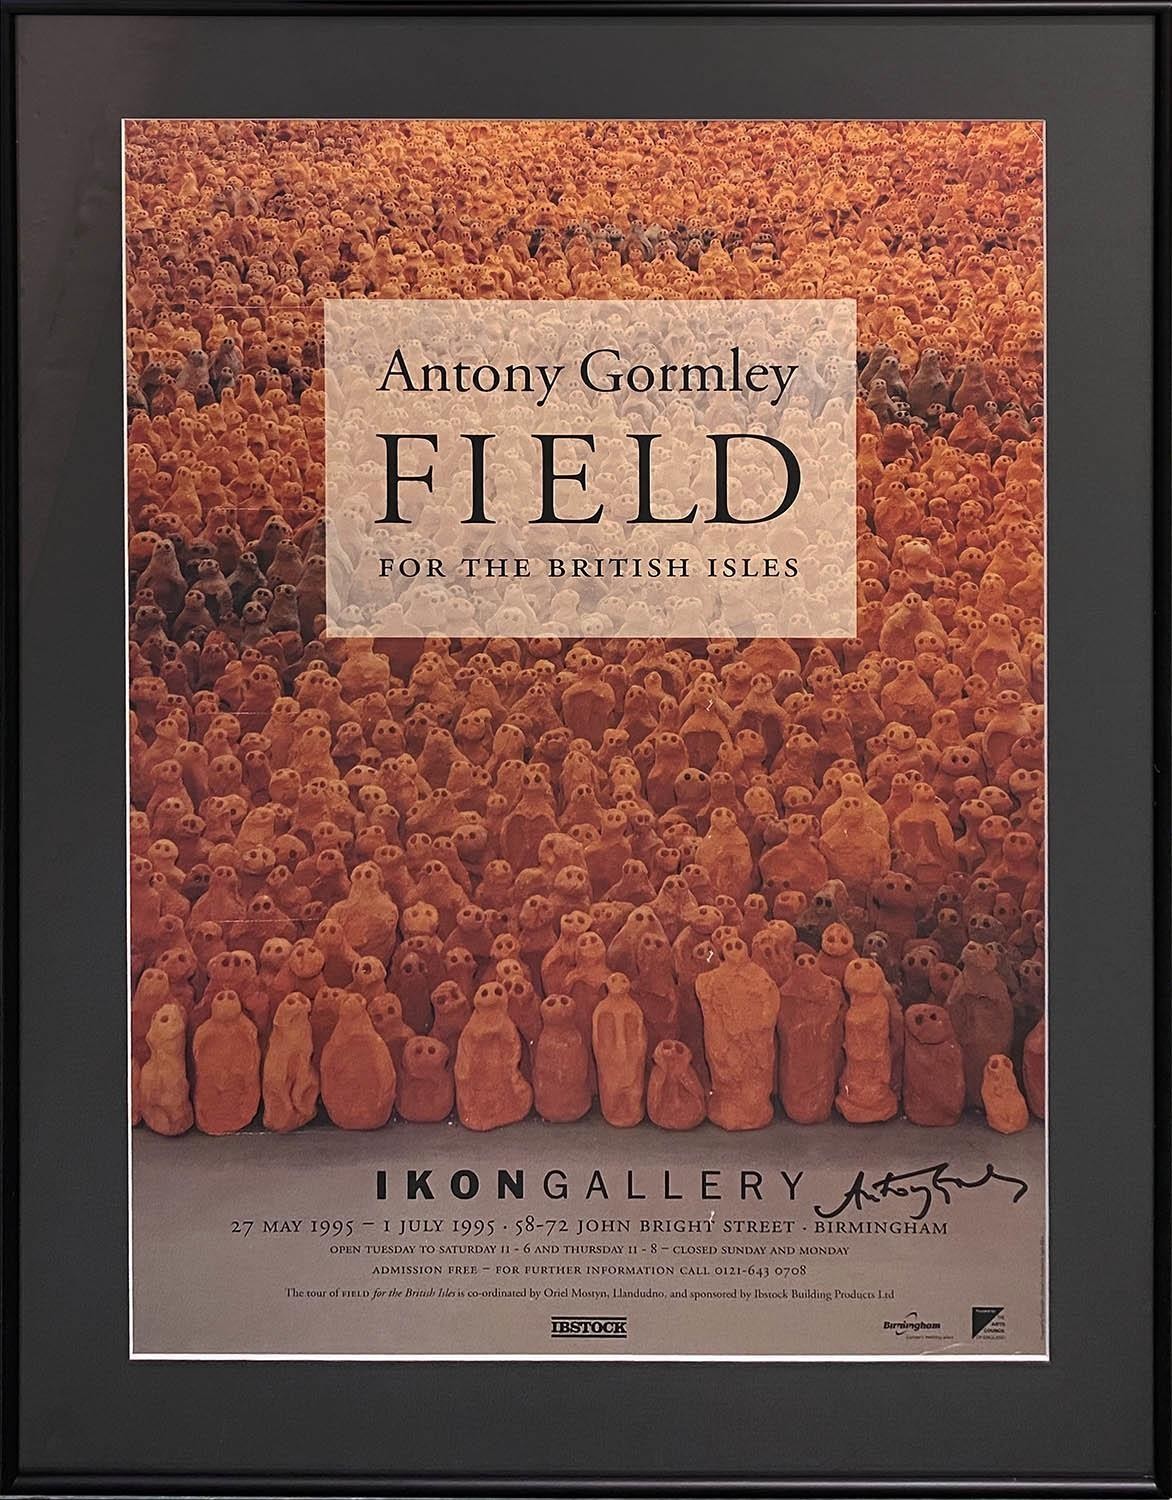 ANTONY GORMLEY 'Field for the British Isles', signed original exhibition poster, 1995, Ikon Gallery,